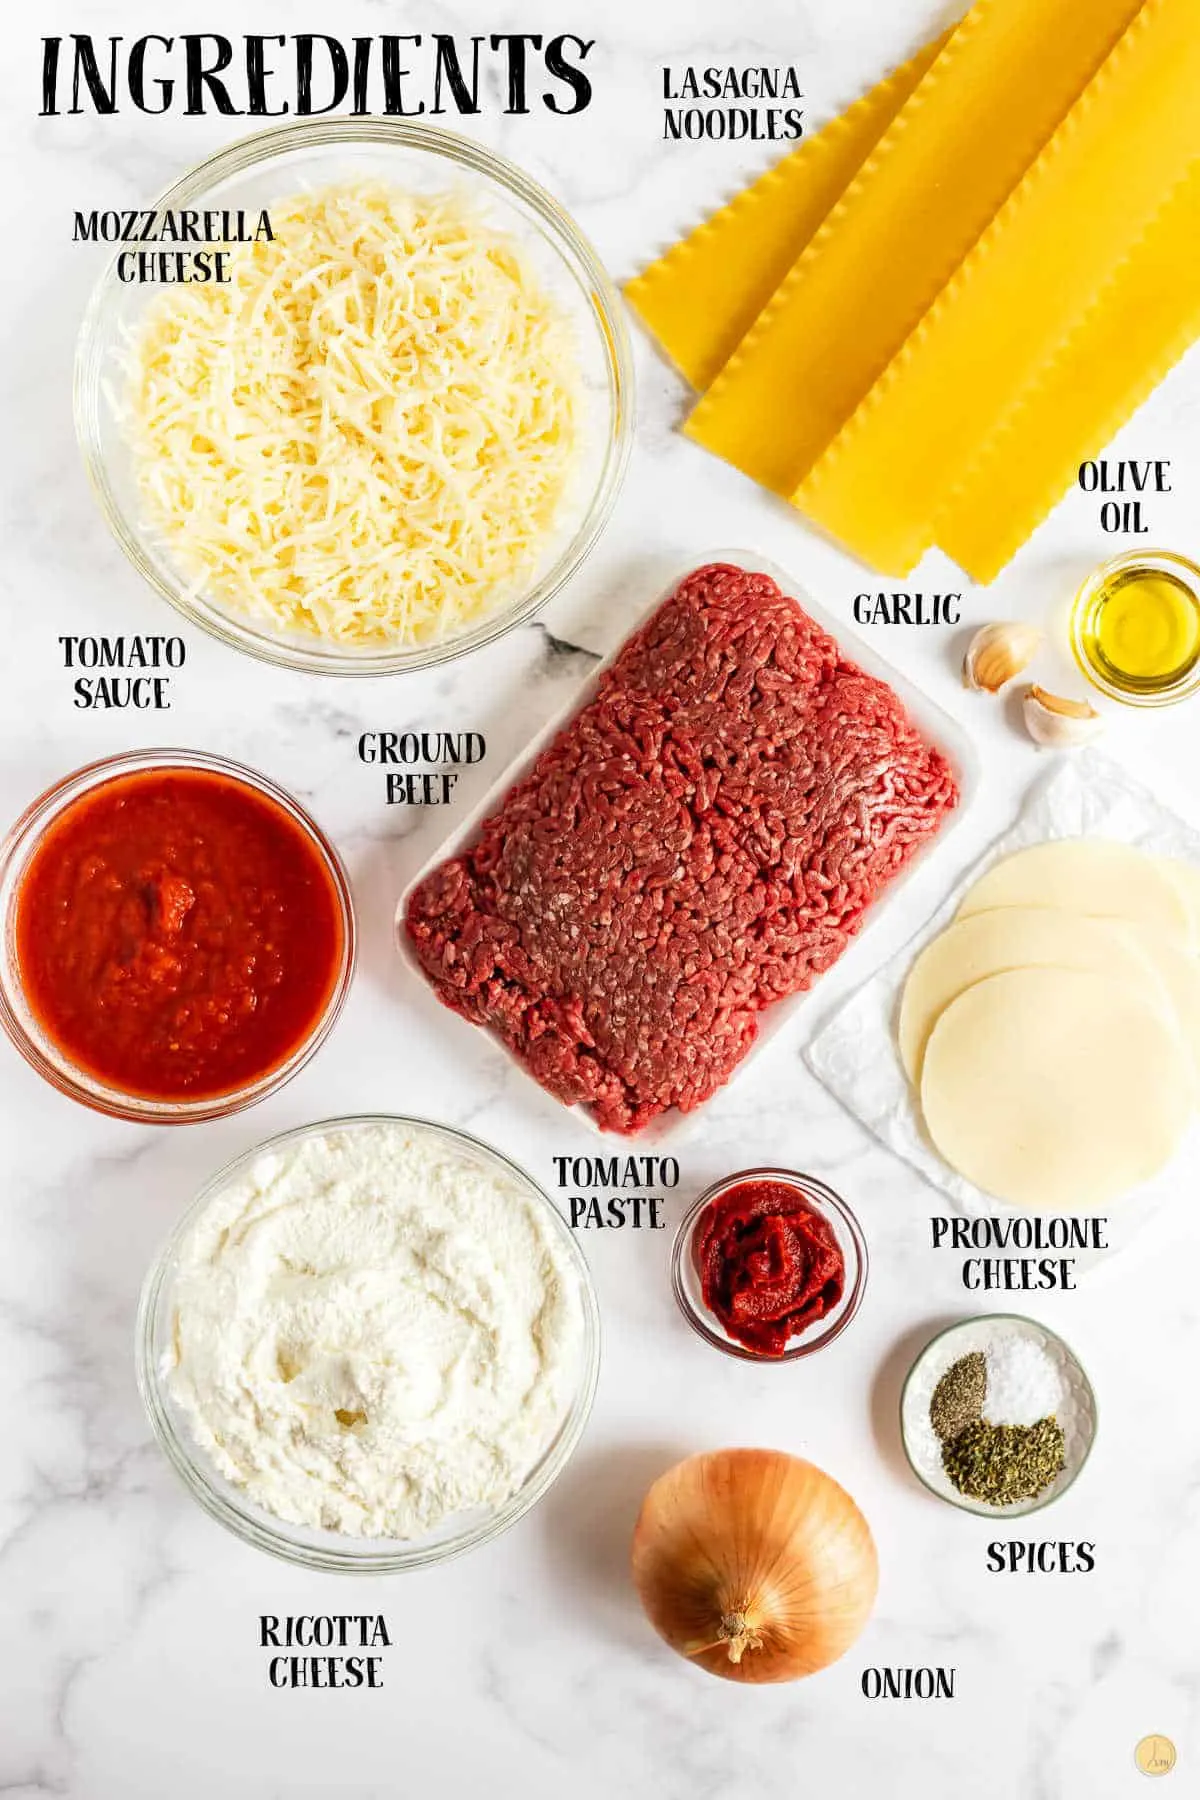 labeled picture of lasagna ingredients